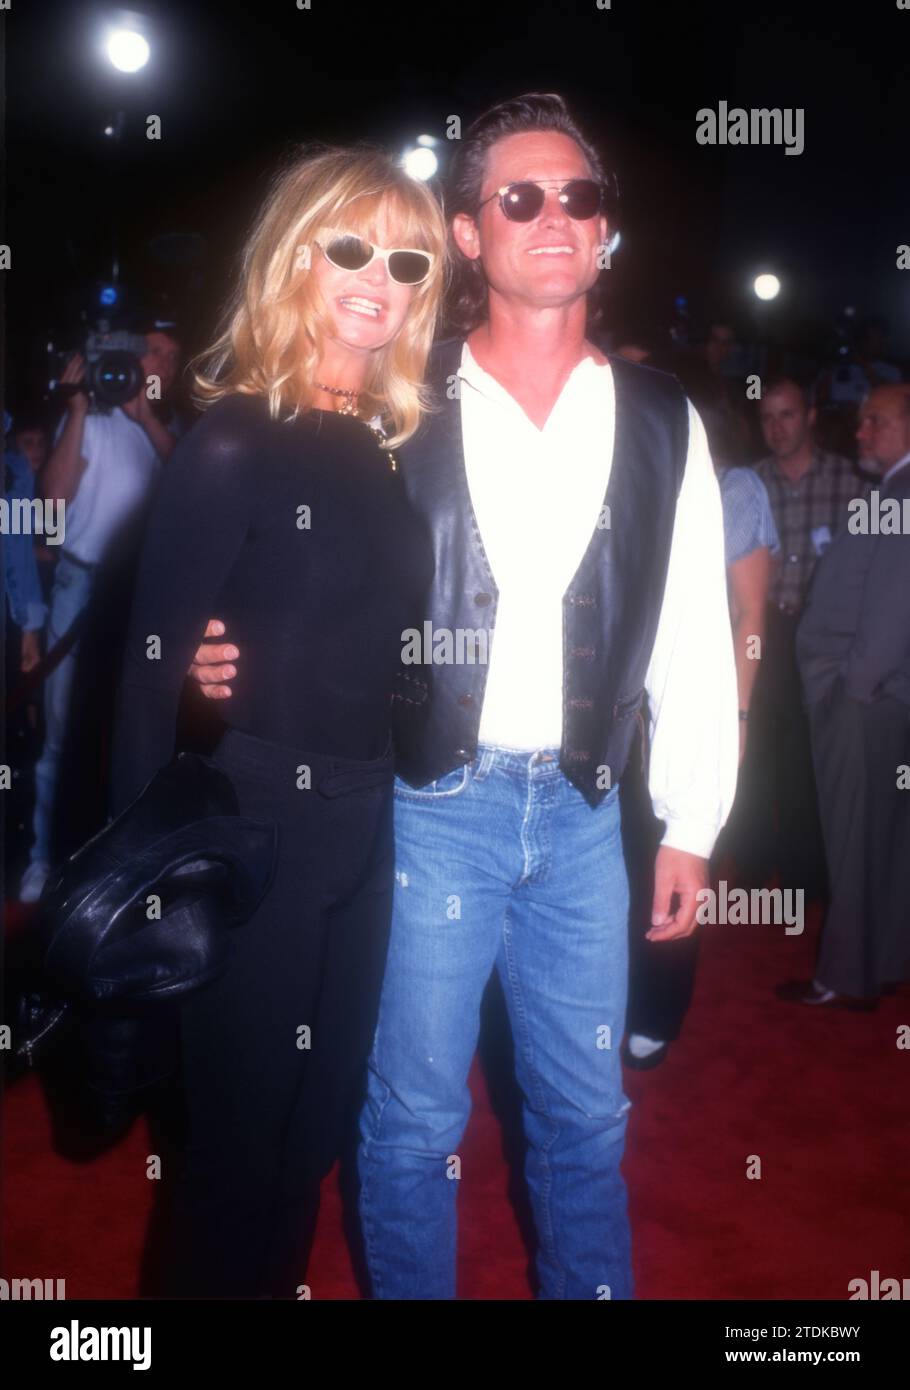 Los Angeles, California, USA 7th August 1996 Actress Goldie Hawn and Actor Kurt Russell attend Paramount Pictures Escape From LA Premiere at Mann Chinese Theatre on August 7, 1996 in Los Angeles, California, USA. Photo by Barry King/Alamy Stock Photo Stock Photo